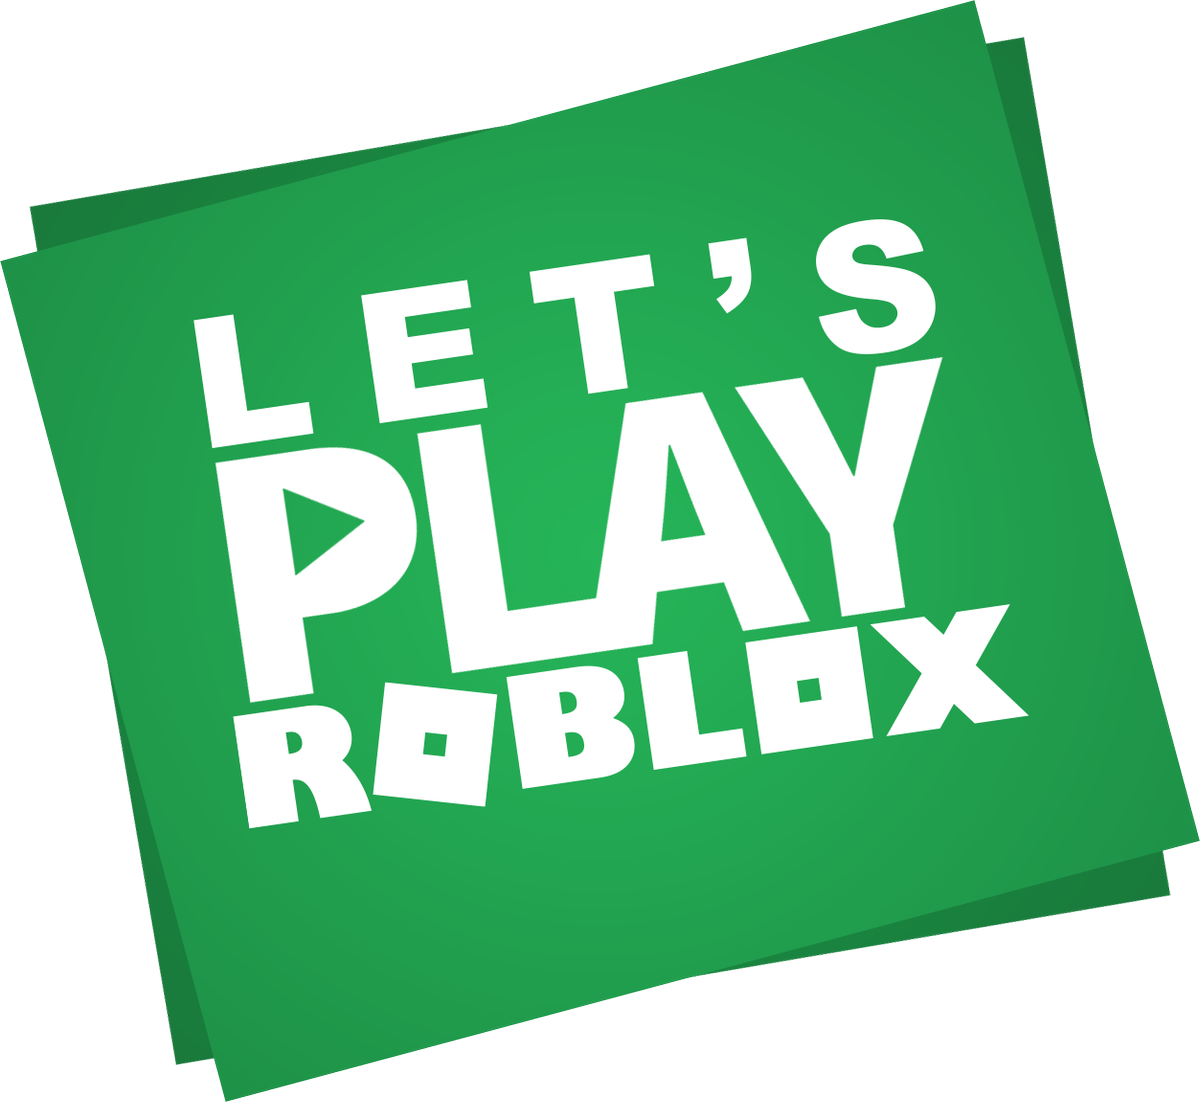 Roblox on Twitter: "It's episode 50 of